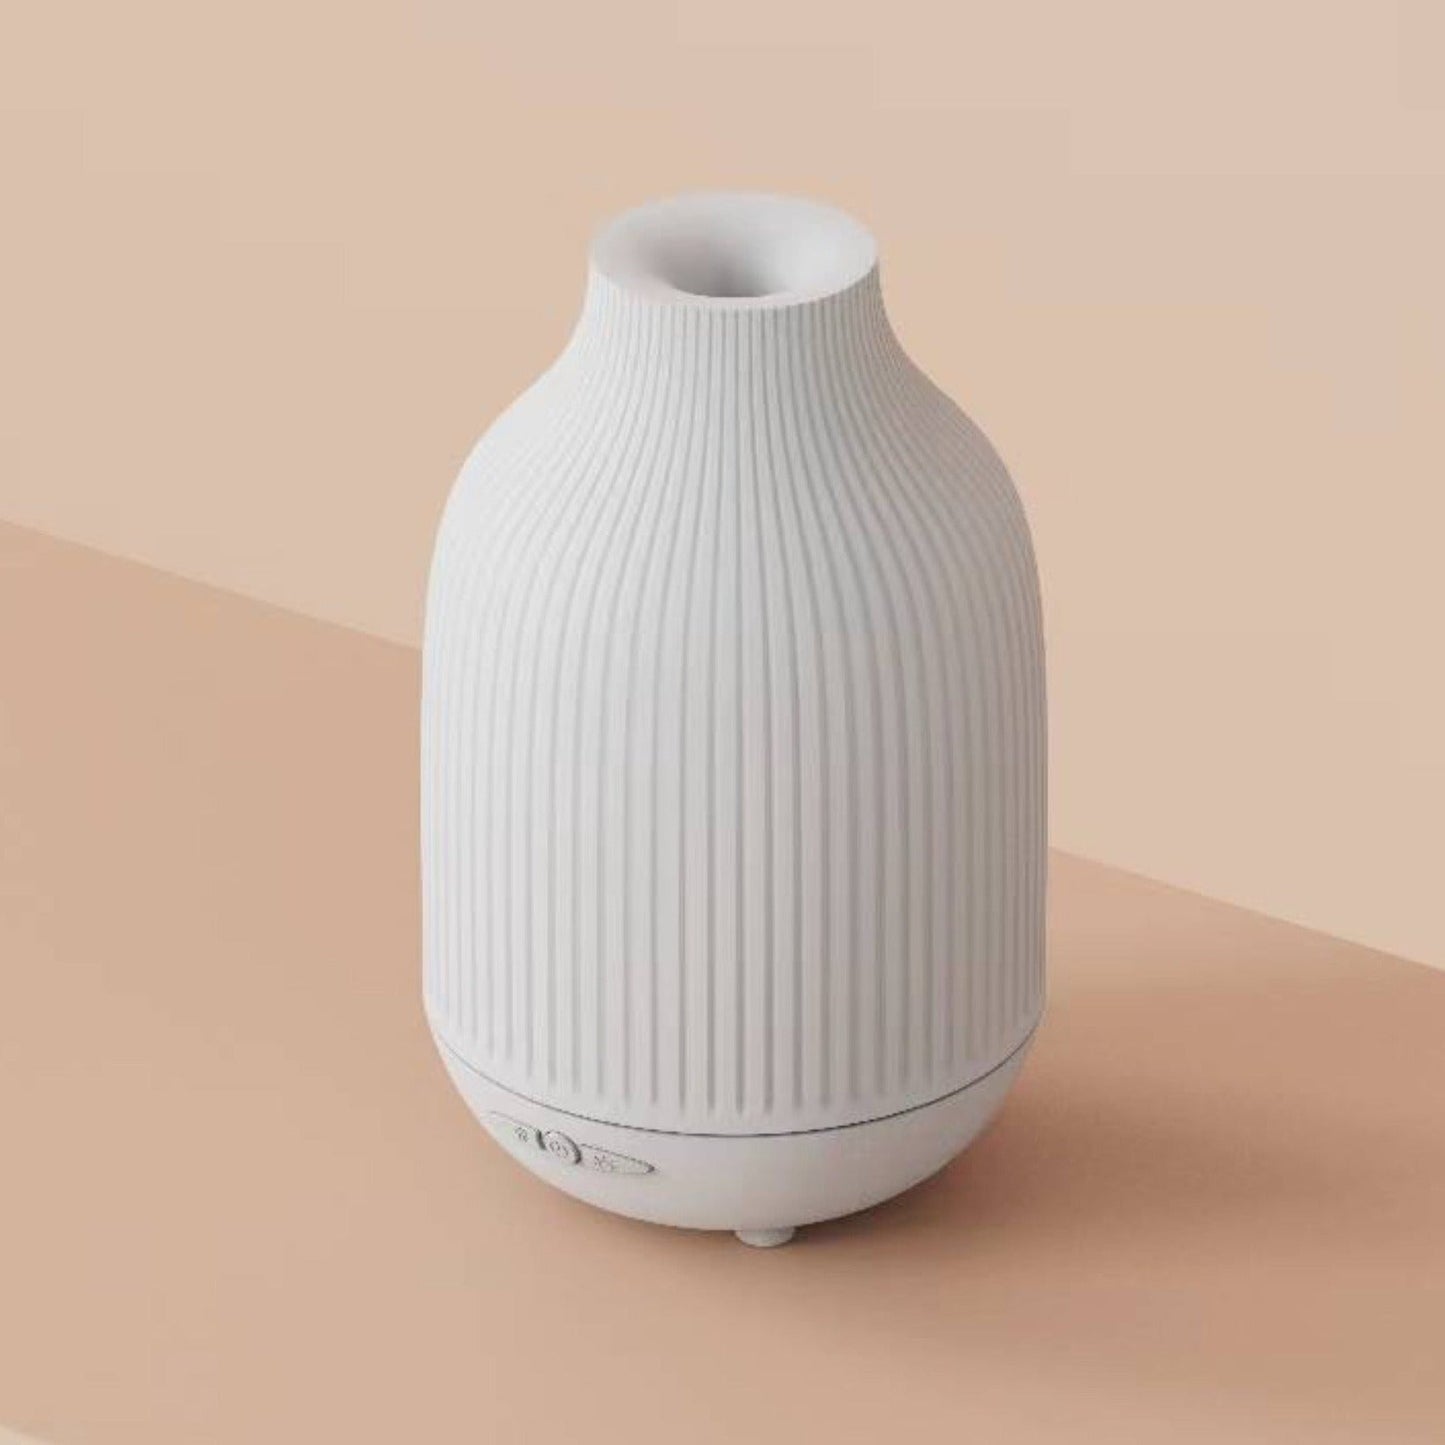 Rechargeable White Stone Oil Diffuser diffuser kotanical 